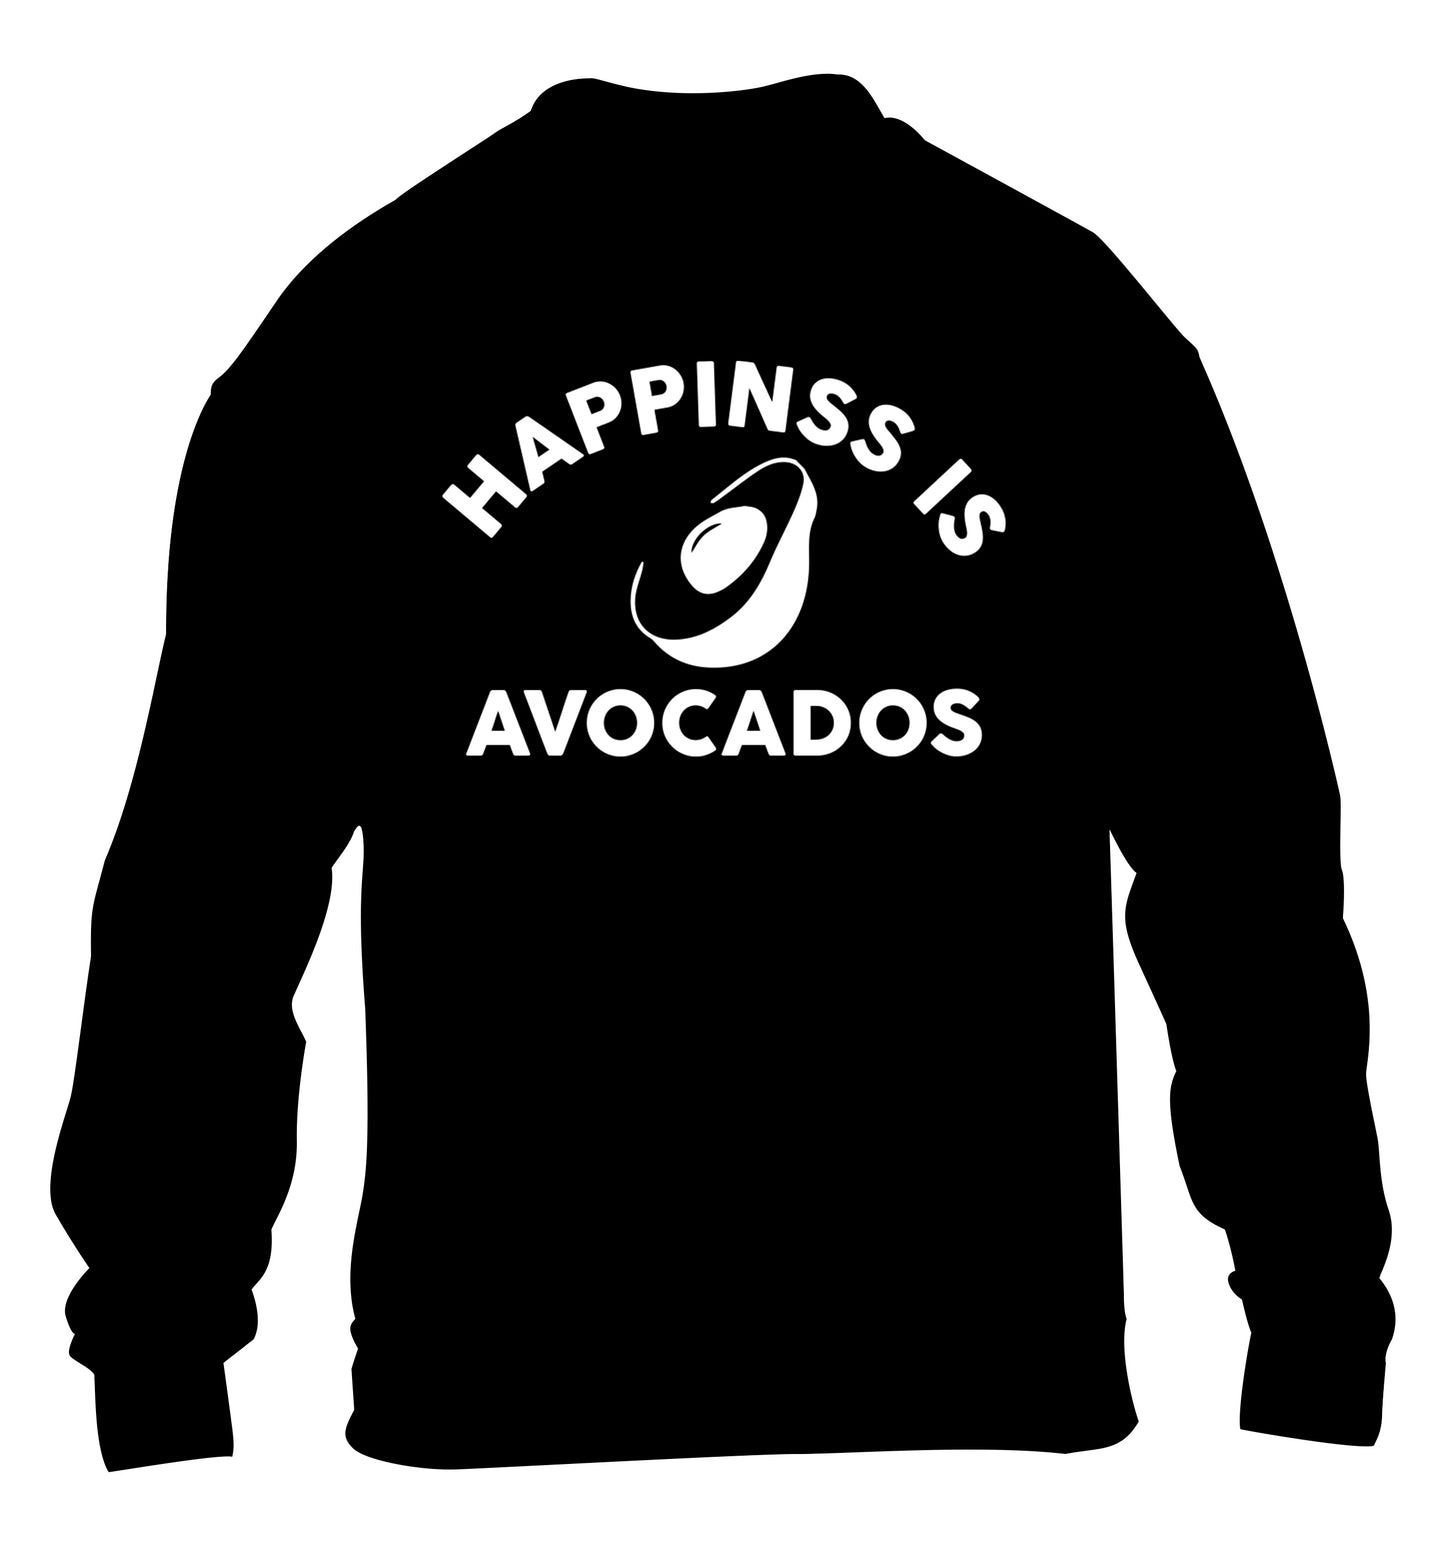 Happiness is avocados children's black sweater 12-14 Years